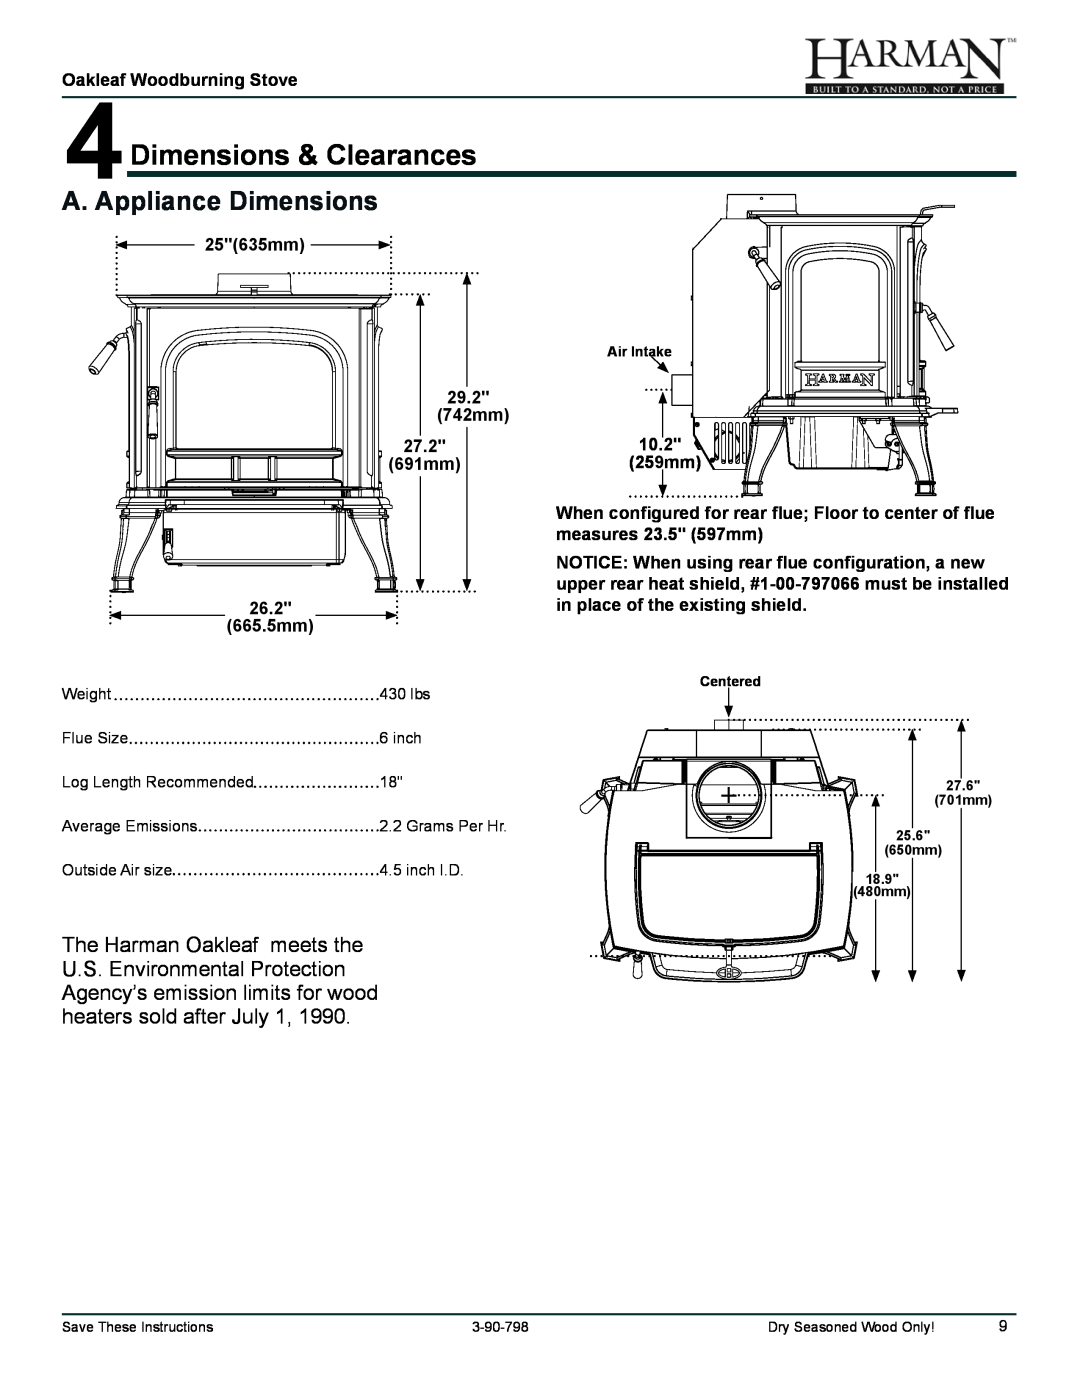 Harman Stove Company 1-90-79700 owner manual 4Dimensions & Clearances, A. Appliance Dimensions 